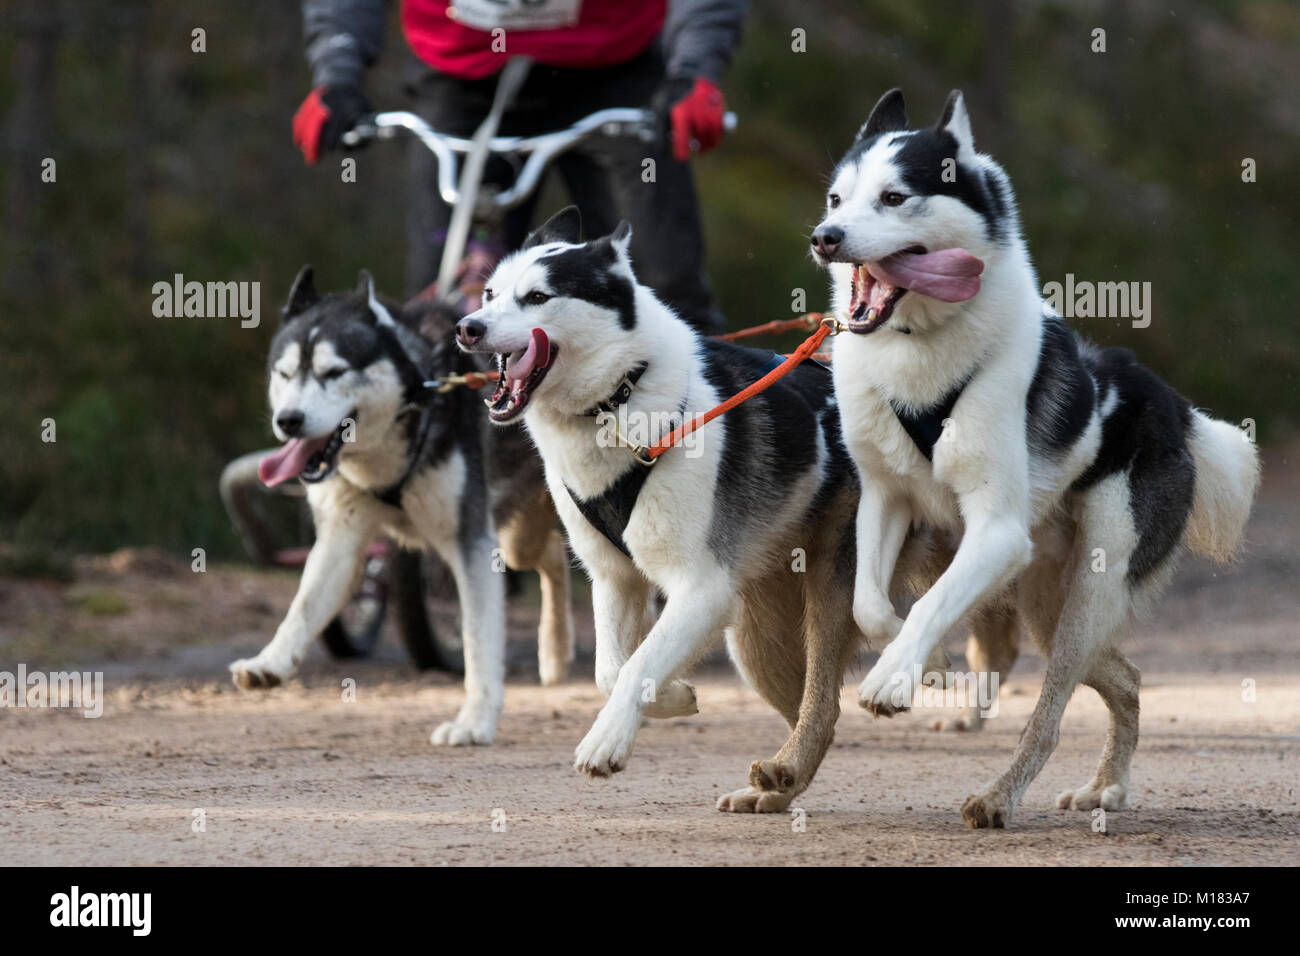 Aviemore, Scotland - 28th January 2018: The Siberian Husky Club of Great Britain stages its 35th Annual Sled Dog Rally on forest trails at Glenmore in Scotland, sponsored by CSJ specialist canine feeds.  Due to lack of snow, the dogs pull special three-wheeled carts instead of sleds. Credit: AC Images/Alamy Live News Stock Photo